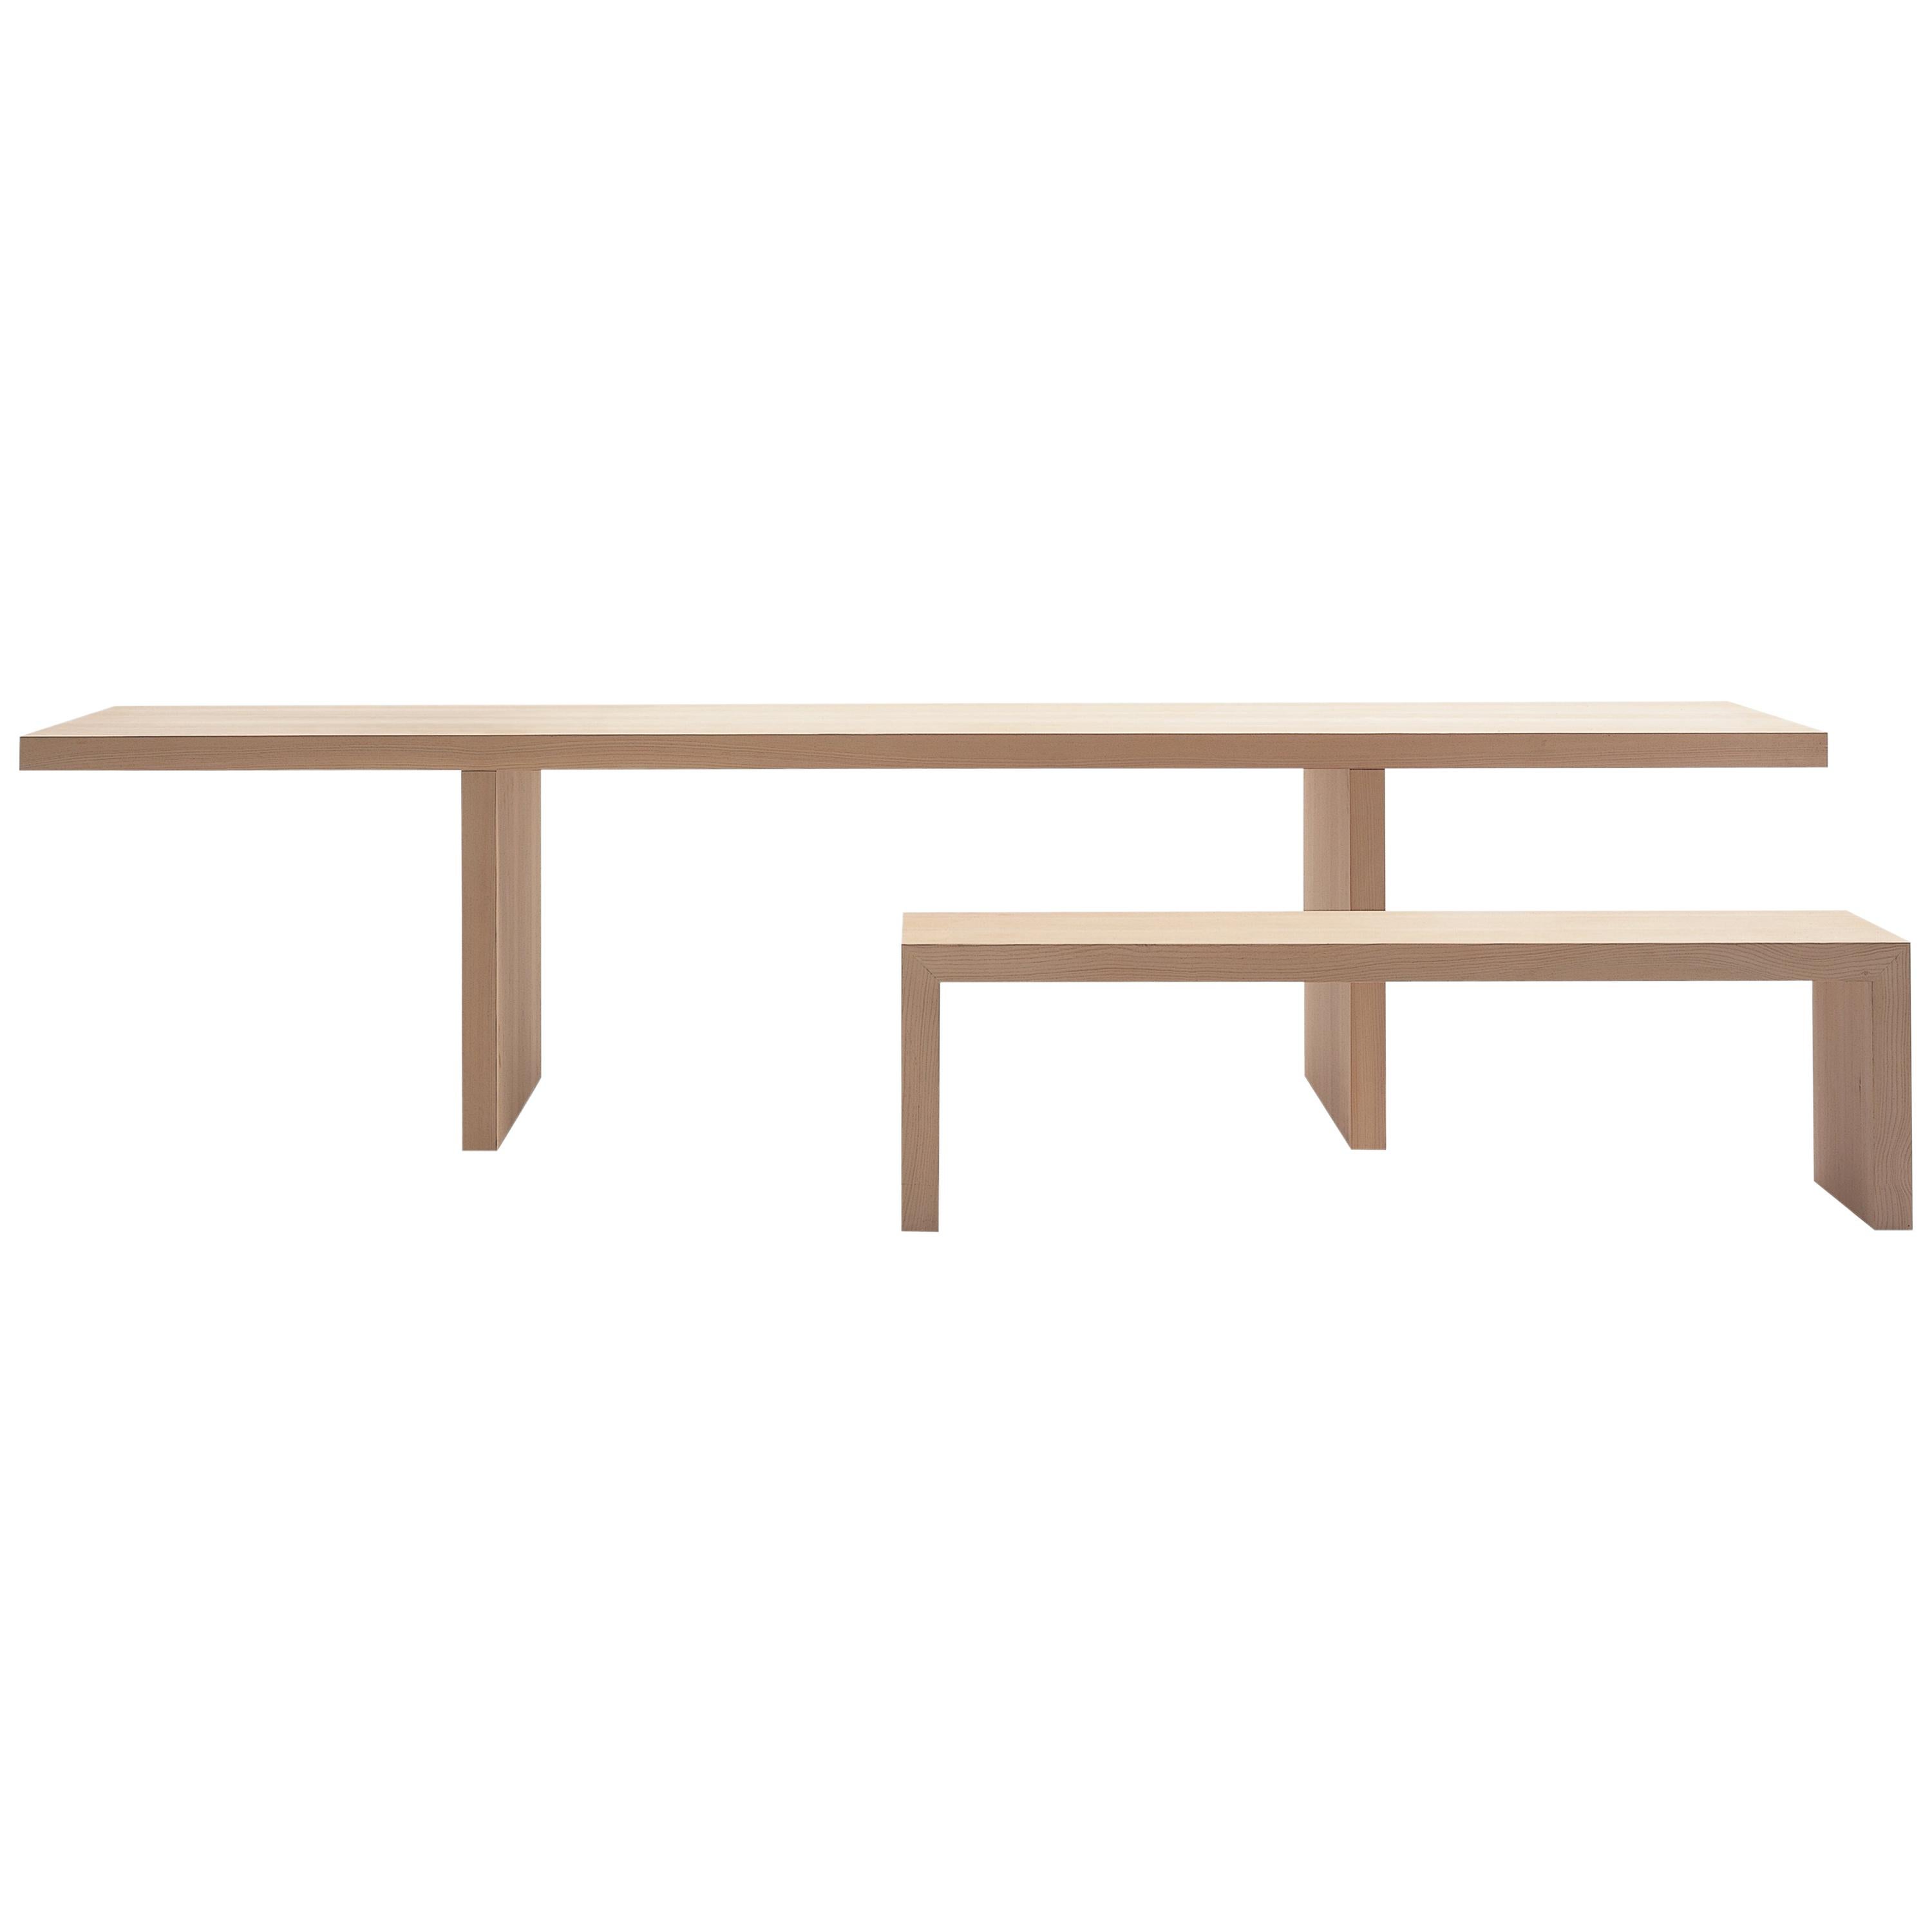 Claudio Silvestrin Millenium Hope Table in Honeycomb Fir for Cappellini